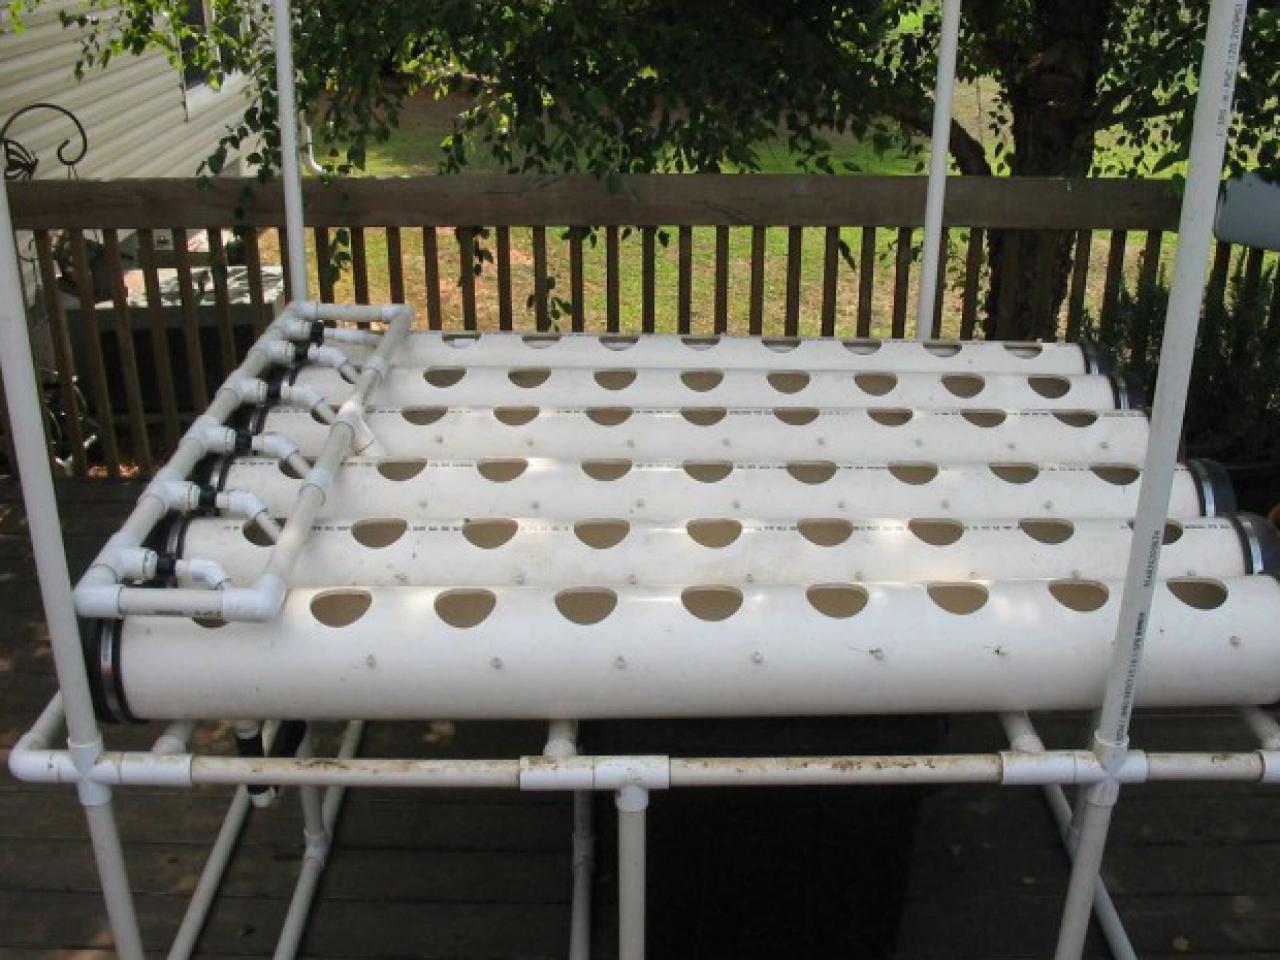 Homemade Hydroponic System